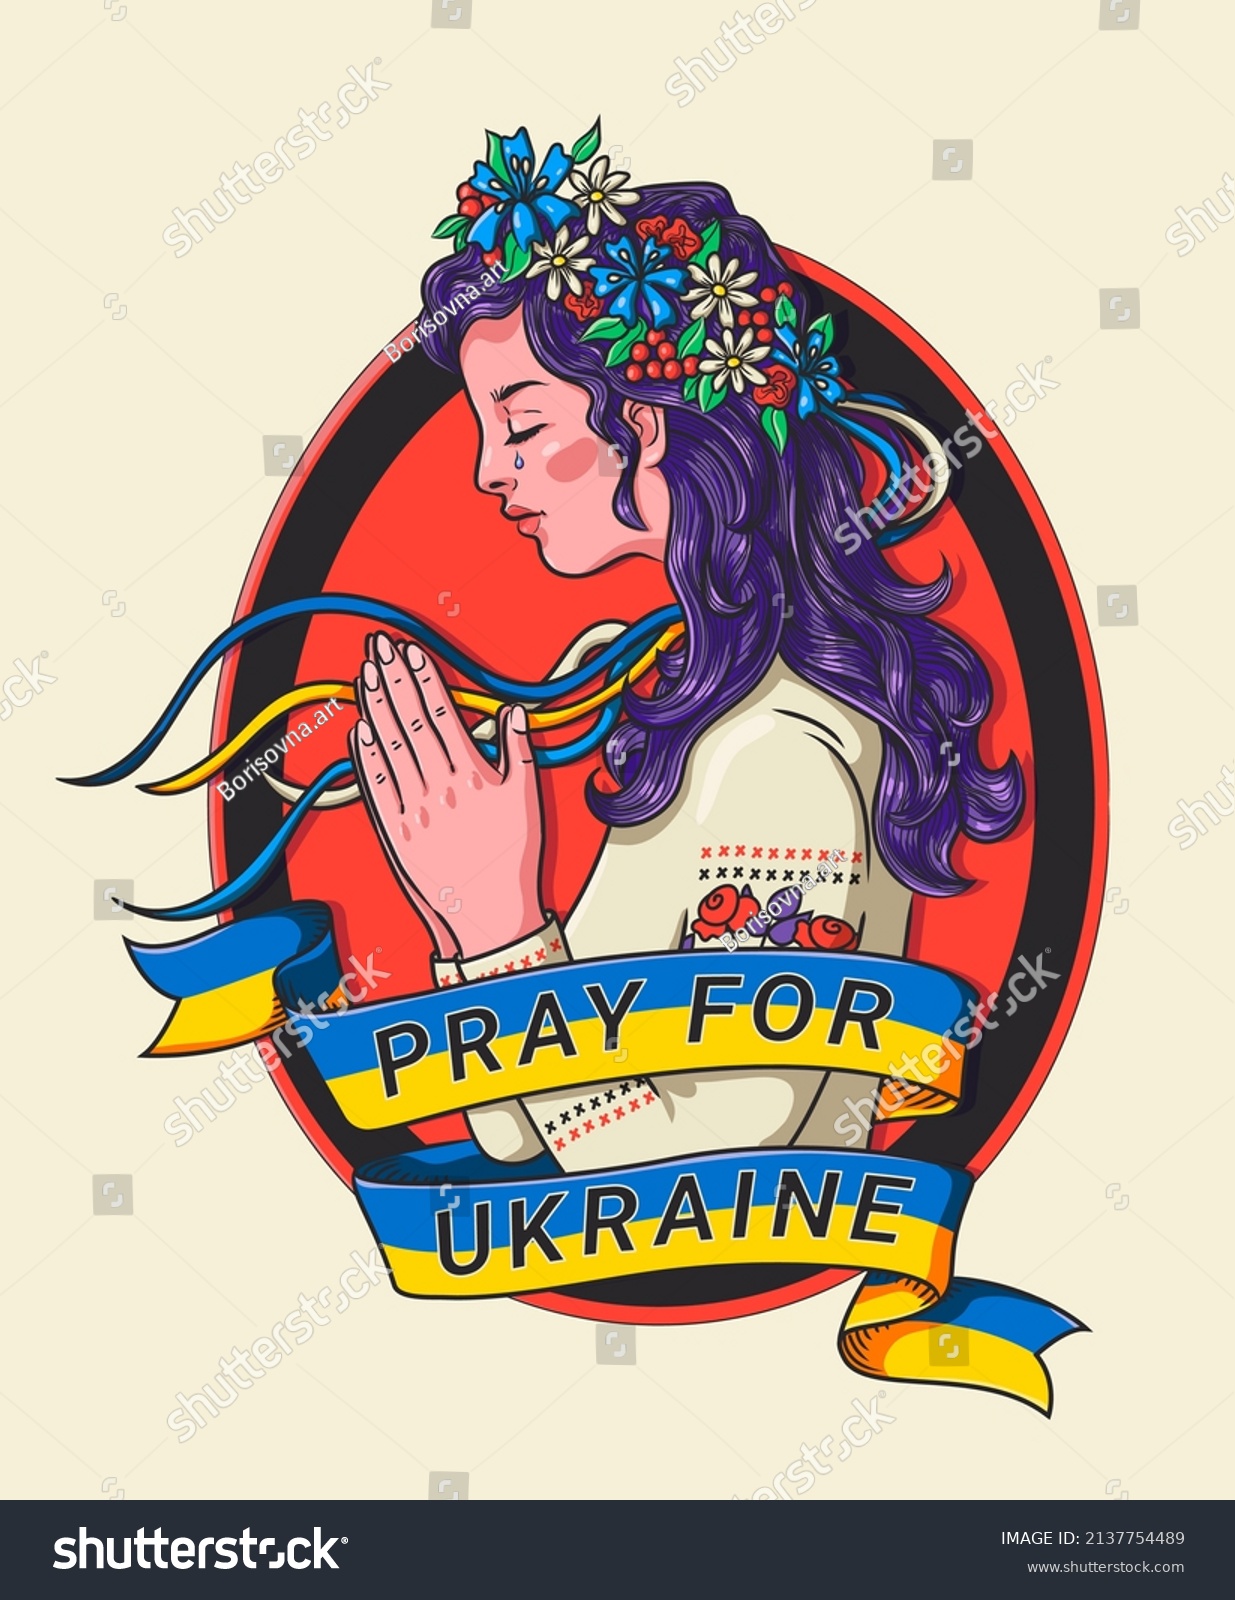 SVG of Pray for Ukraine vector illustration. Art for supporting Ukraine during the Russian invasion. A young girl in national vishivanka asking God for help. svg